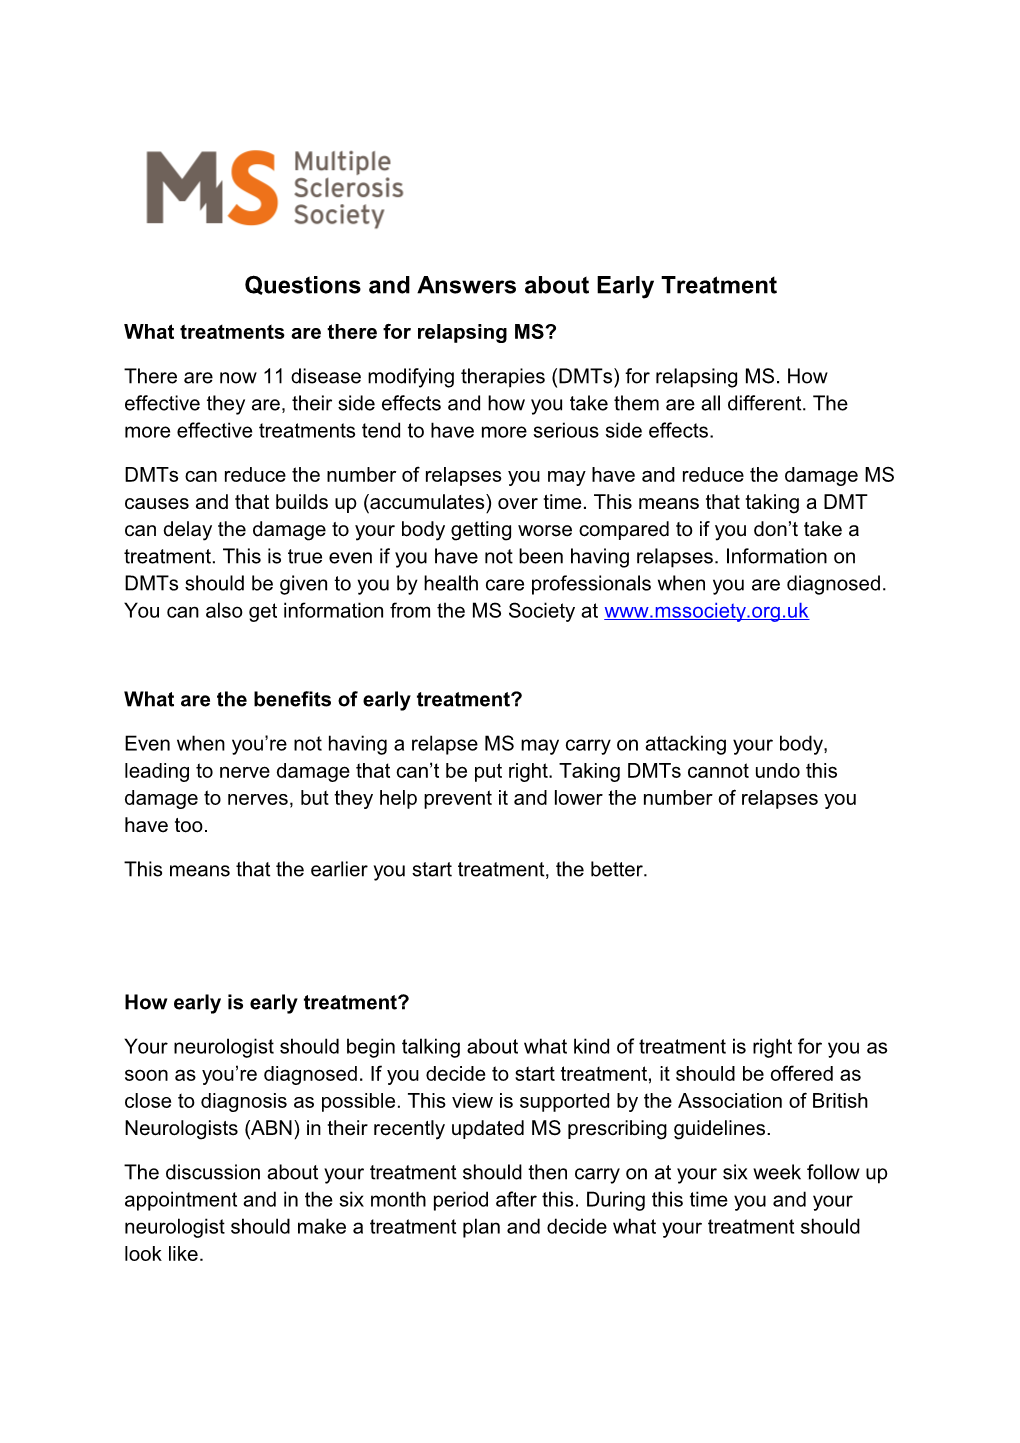 Questions and Answers About Early Treatment